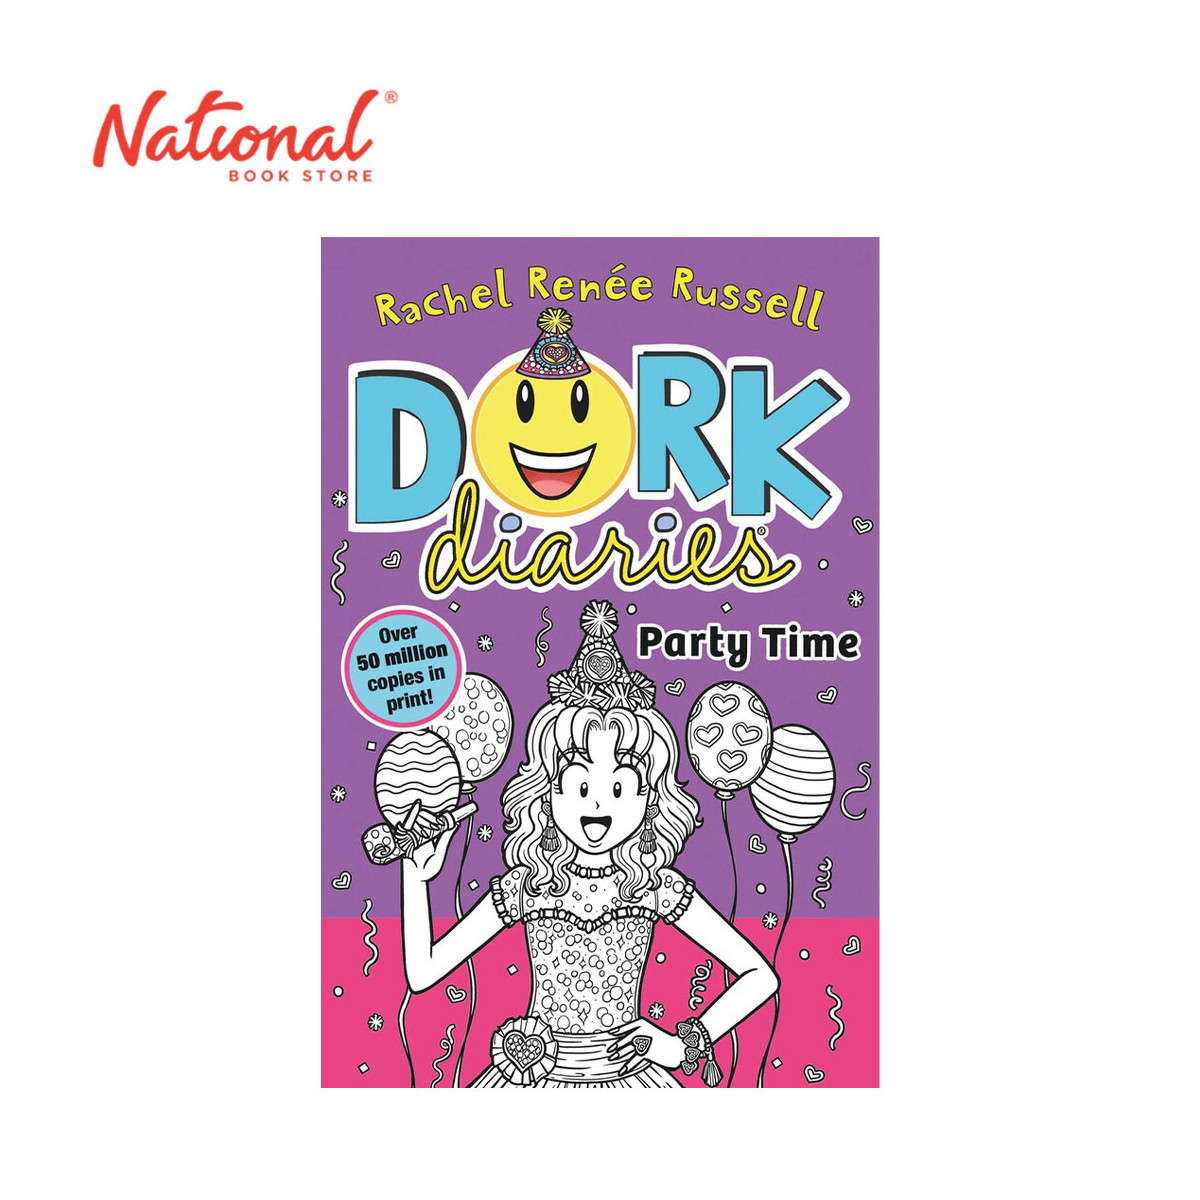 Dork Diaries 2: Party Time UK New Cover By Rachel Renee Russell - Trade Paperback - Children's Books